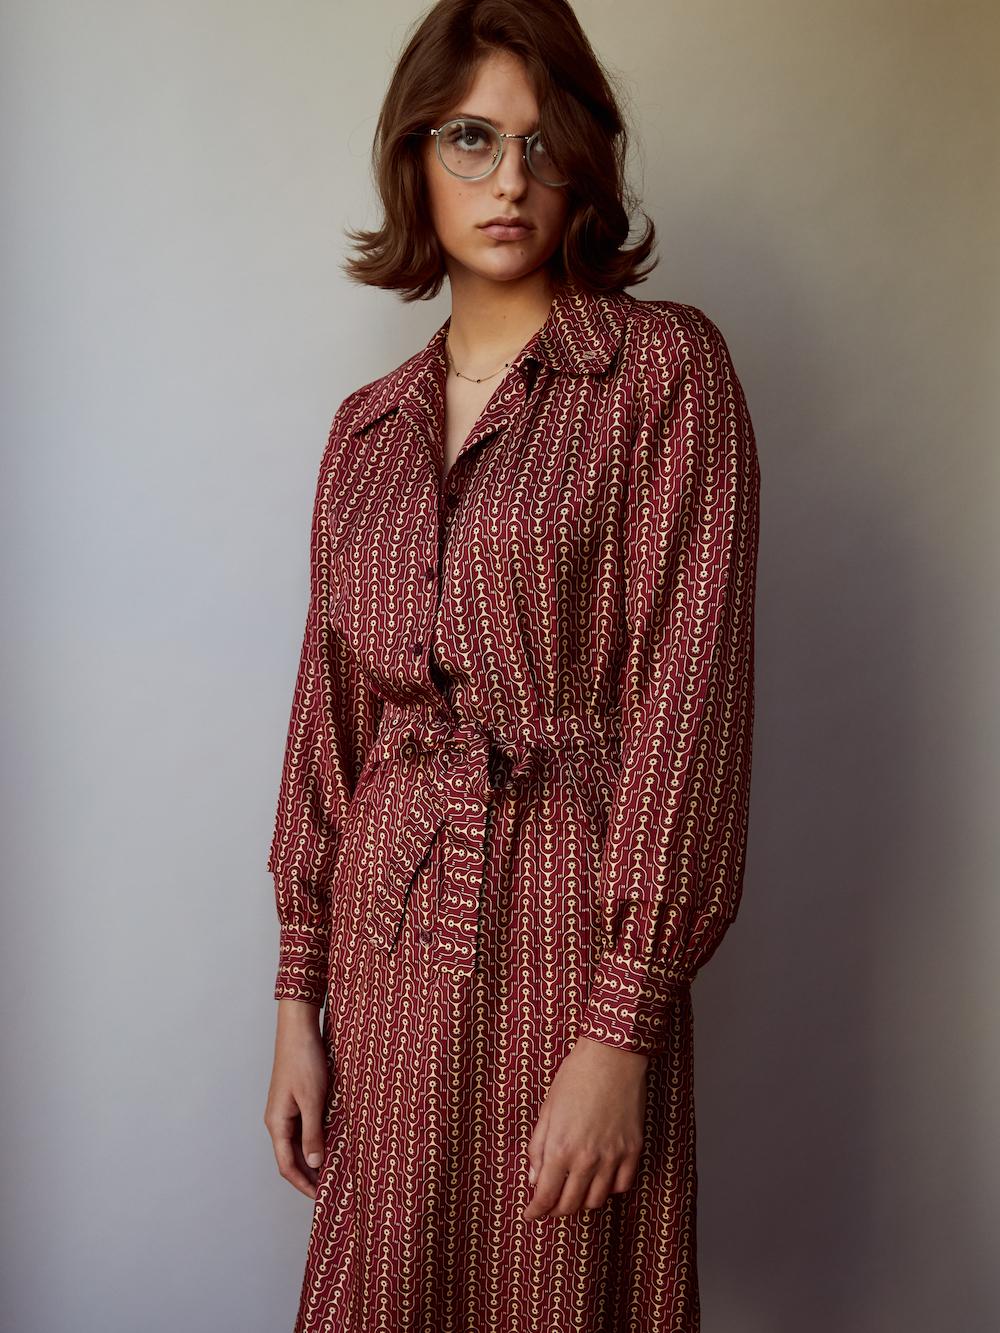 Midi silk dress with sleeves pleated details and emblematic equestrian spur print, slightly opened on the sides.
- Hermès logo printed
- Burgundy mother of pearl buttons
- Very fine heavy silk
- Made in France
- Come with fabric belt, can also be